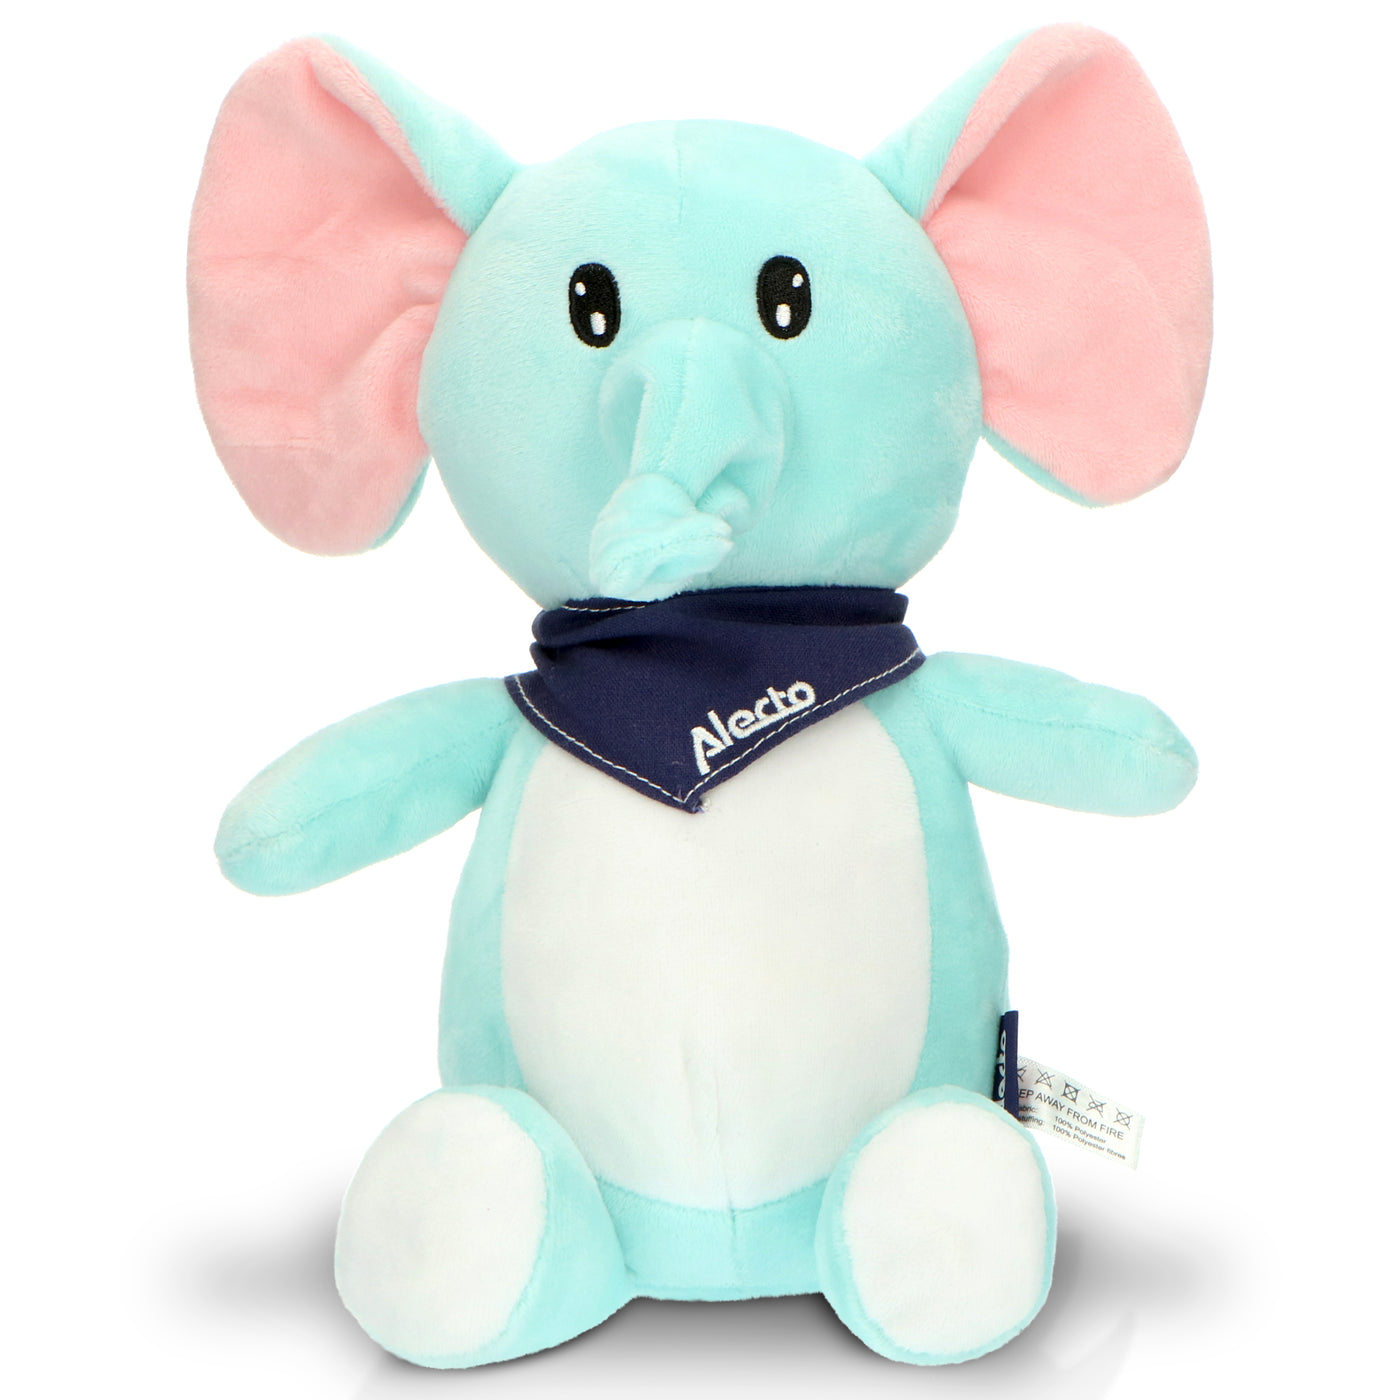 Alecto BC350 - Cuddly elephant with soothing sounds and night light